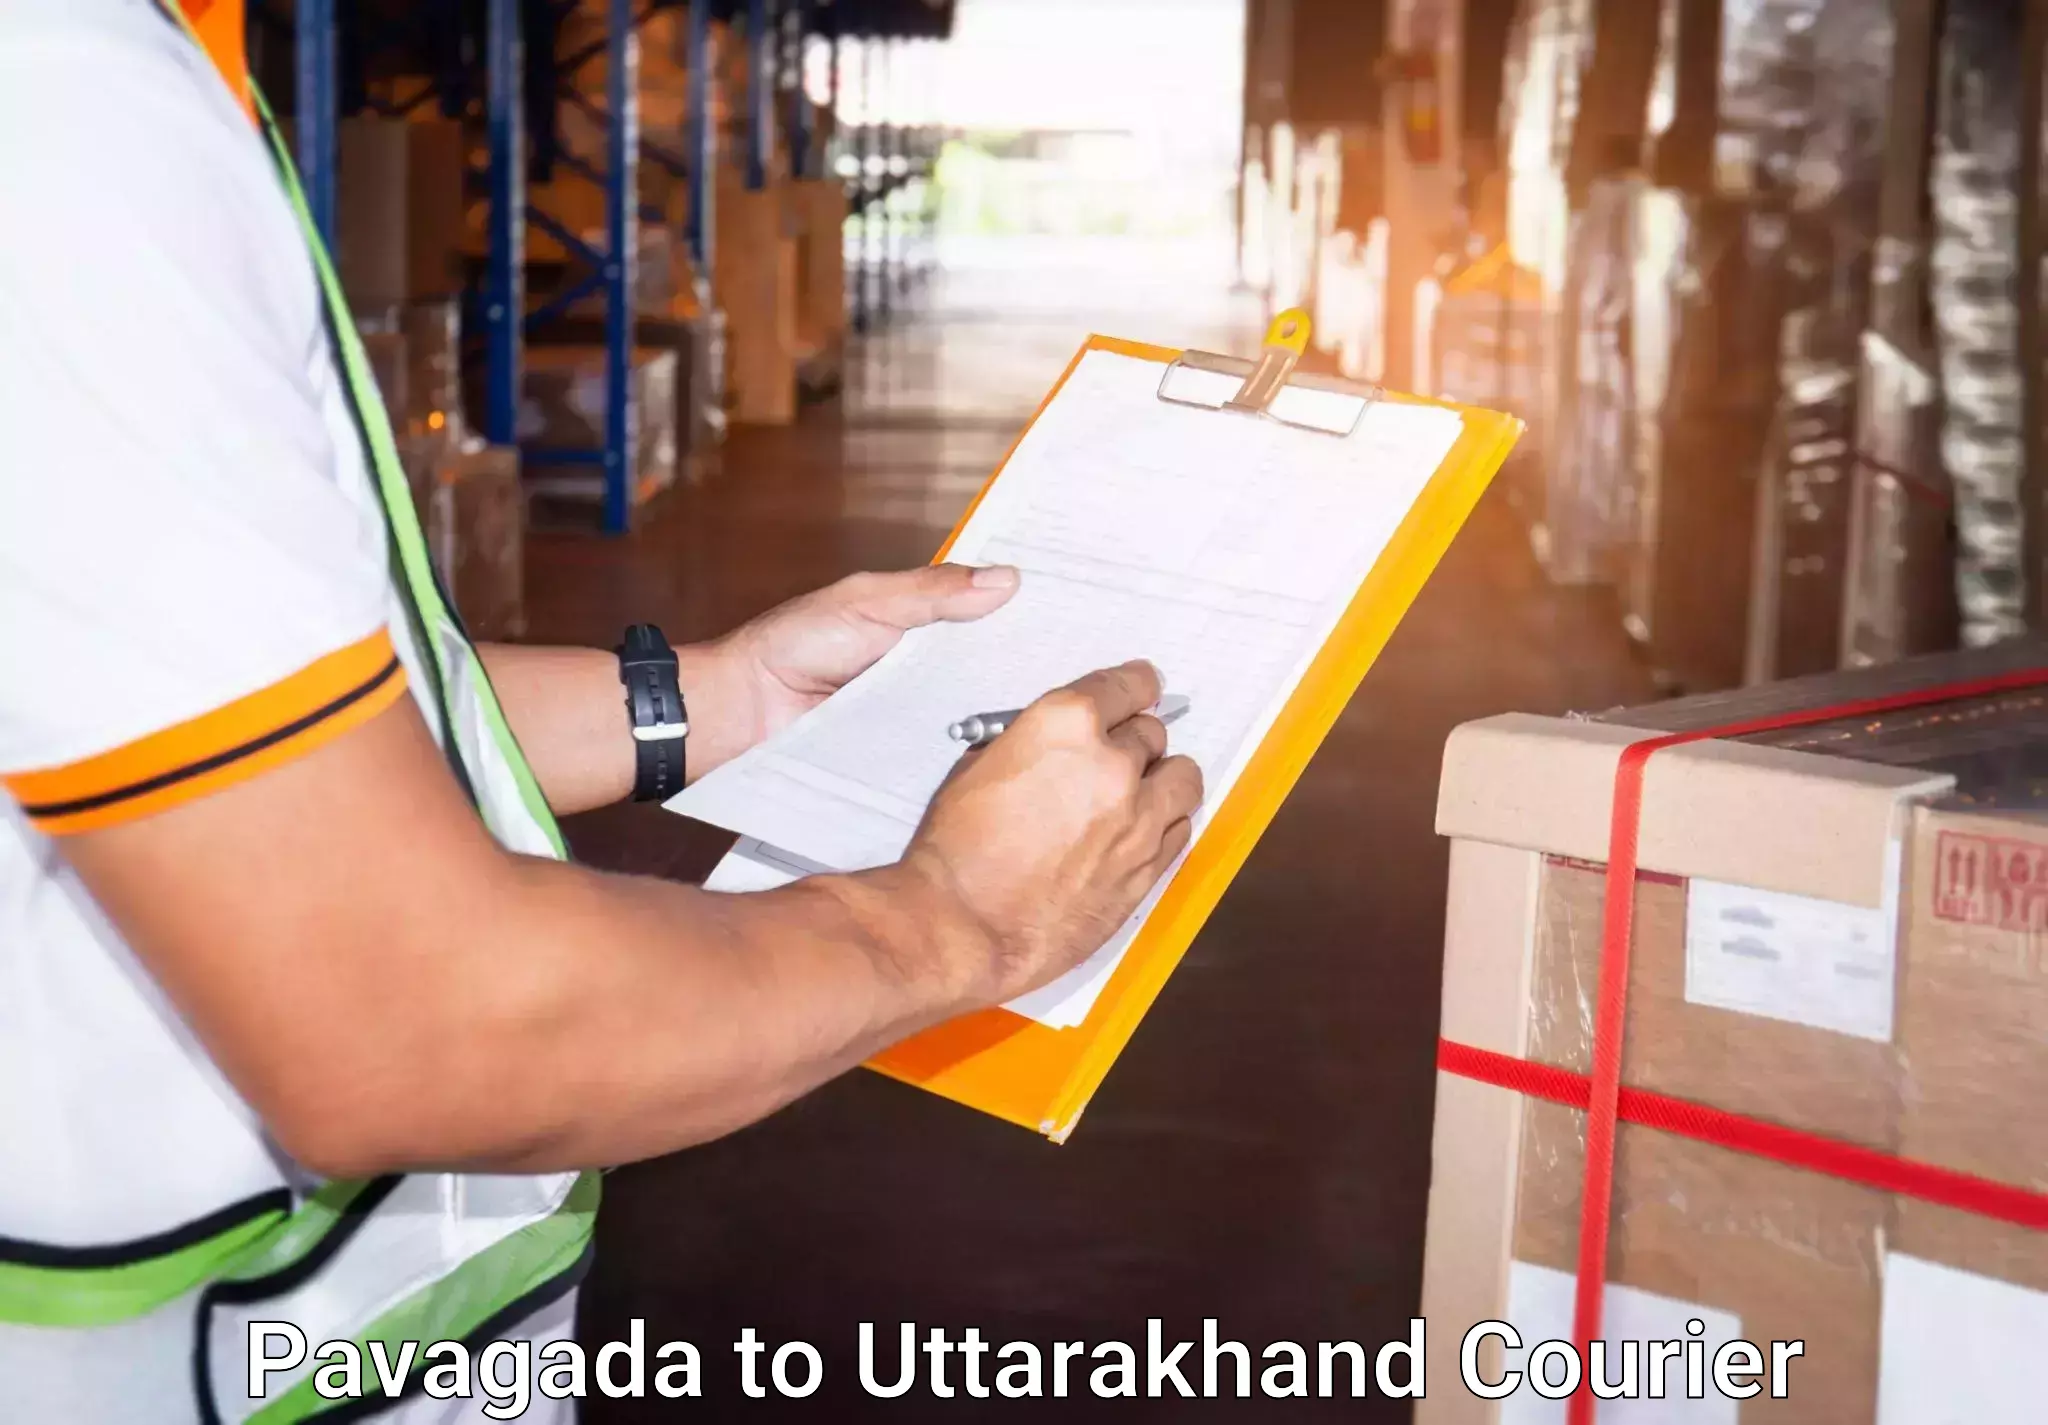 Luggage storage and delivery in Pavagada to Uttarakhand